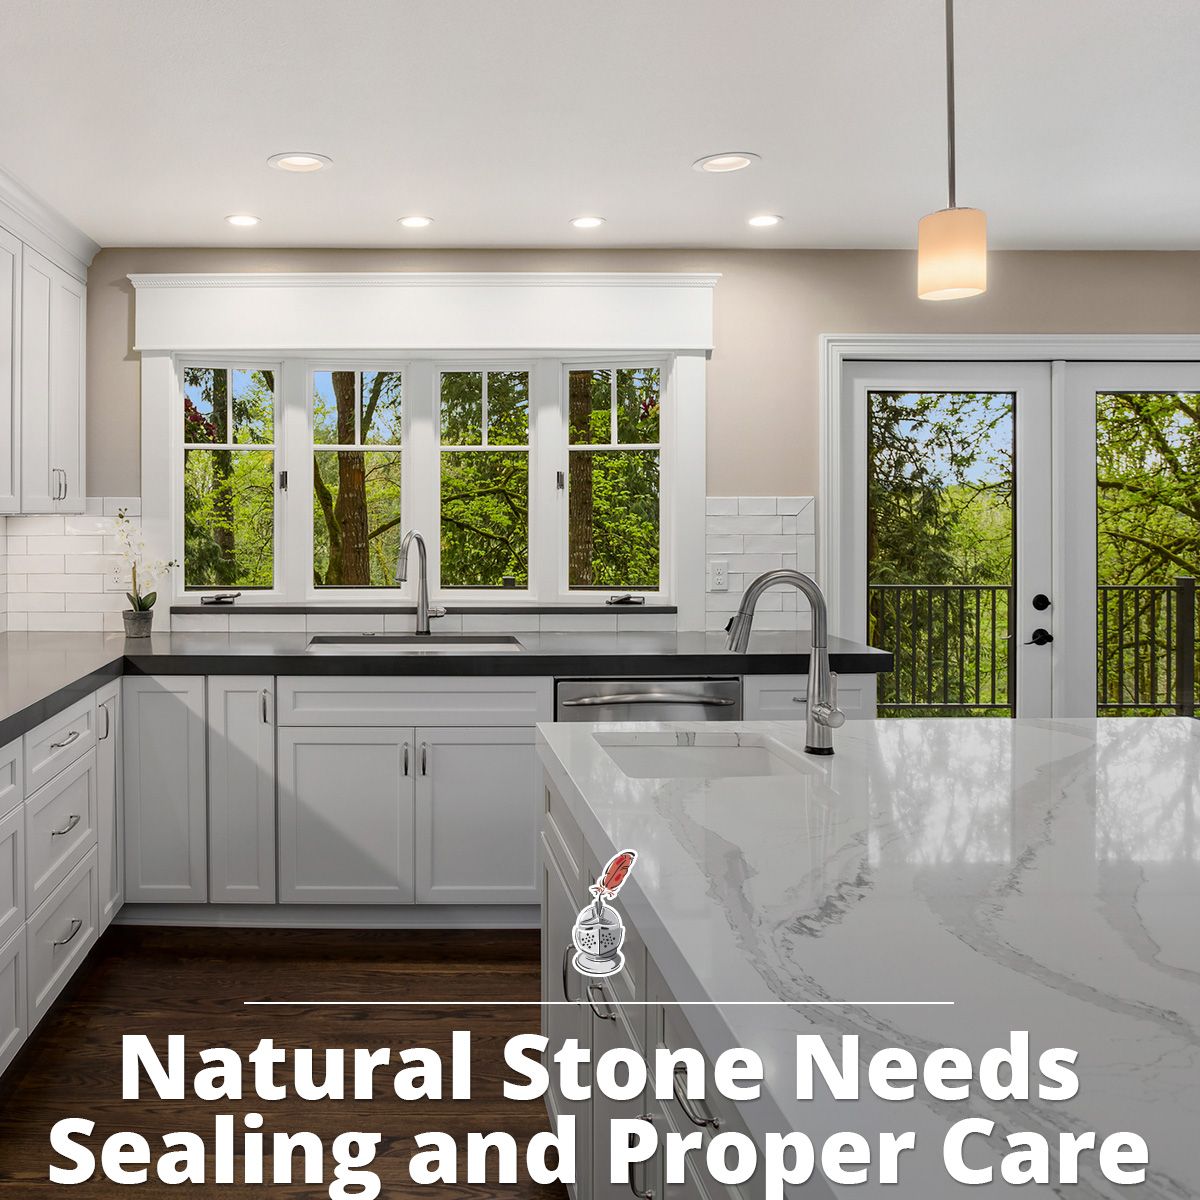 Natural Stone Needs Sealing and Proper Care